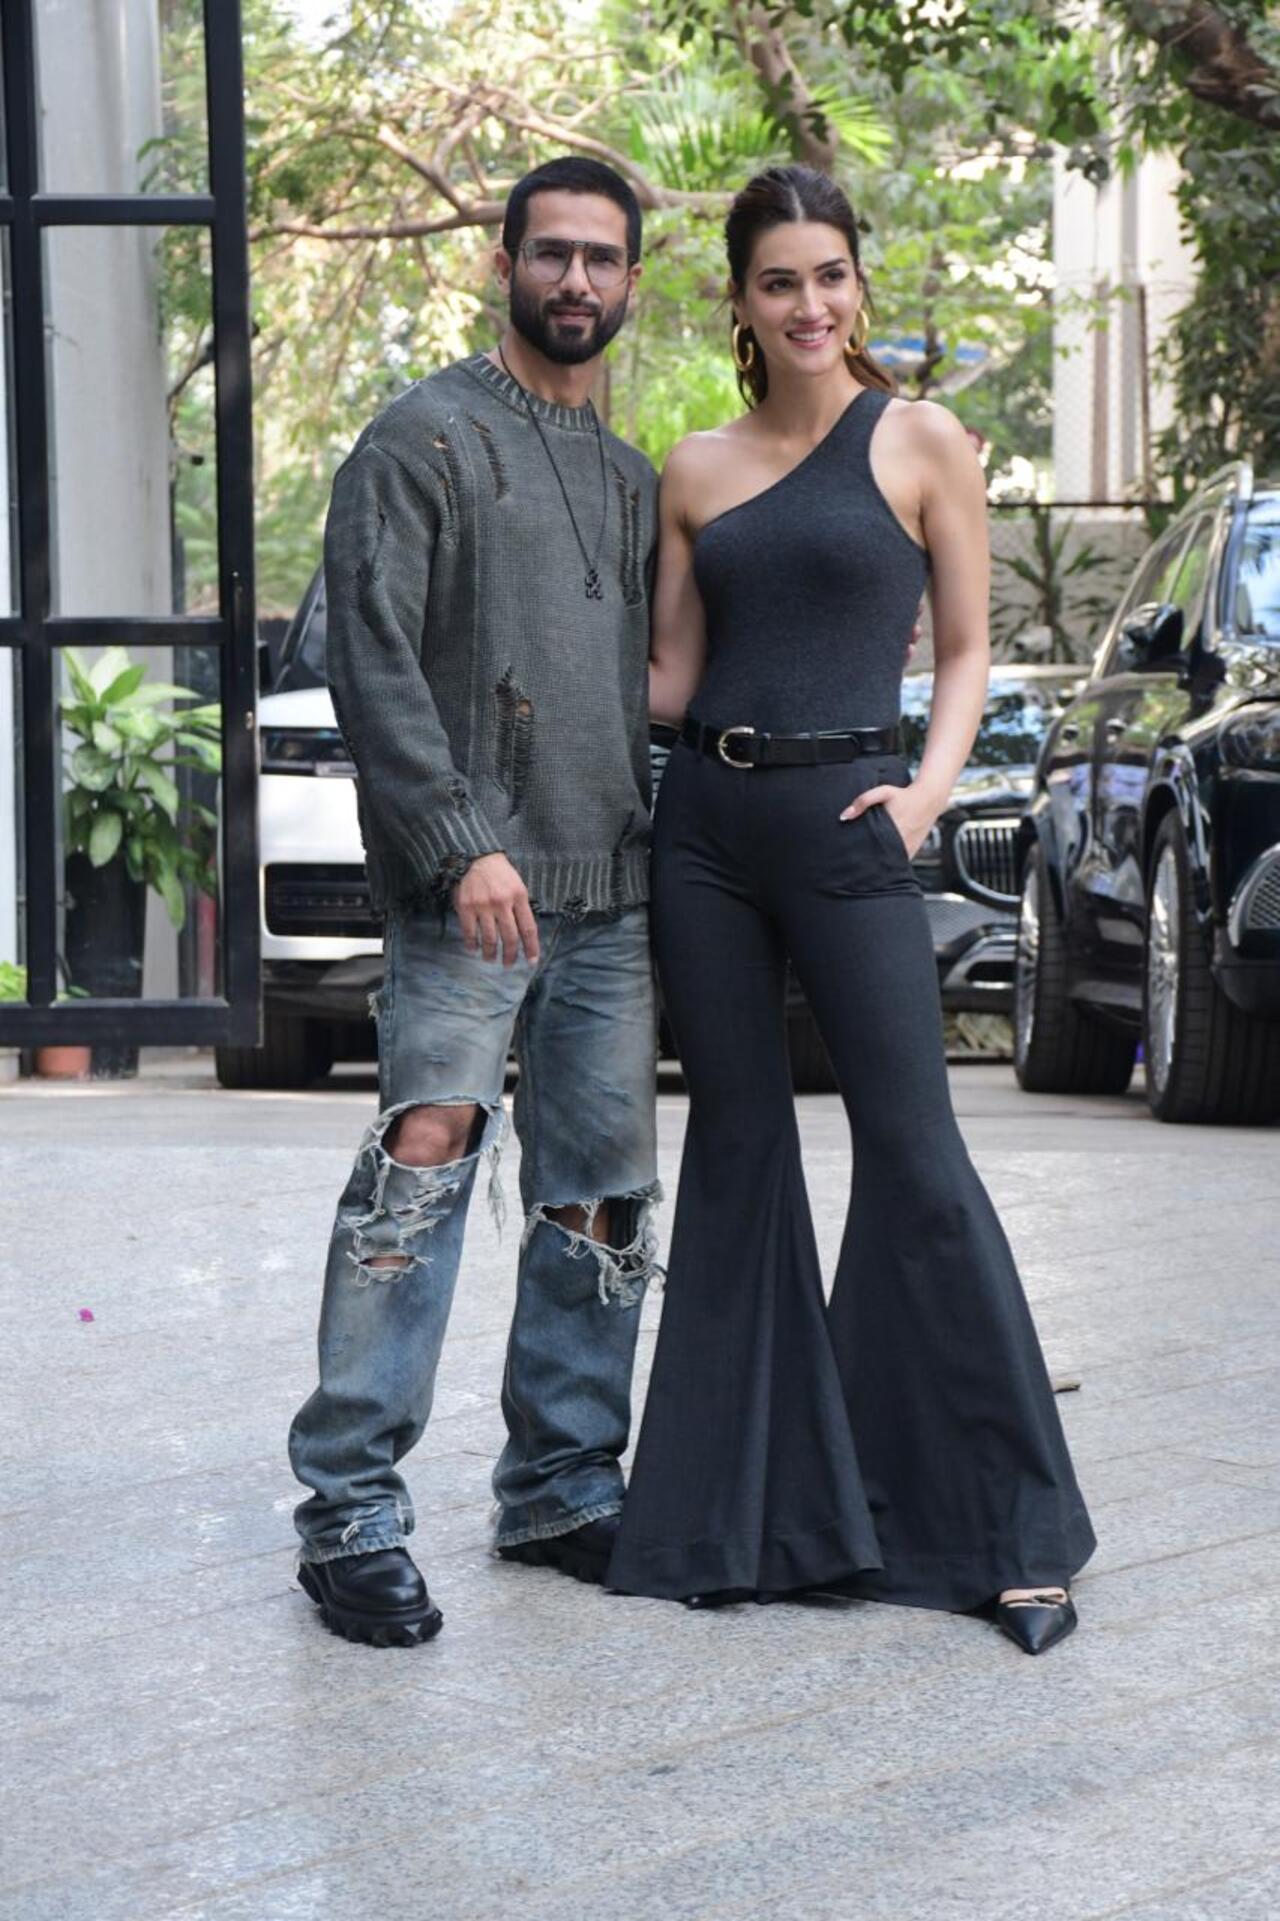 Ahead of the release of their film 'Teri Baaton Mein Aisa Uljha Jiya,' Shahid Kapoor and Kriti Sanon were spotted in the city wearing relaxed black ensembles, as they exuded the ideal balance of sexiness and sophistication